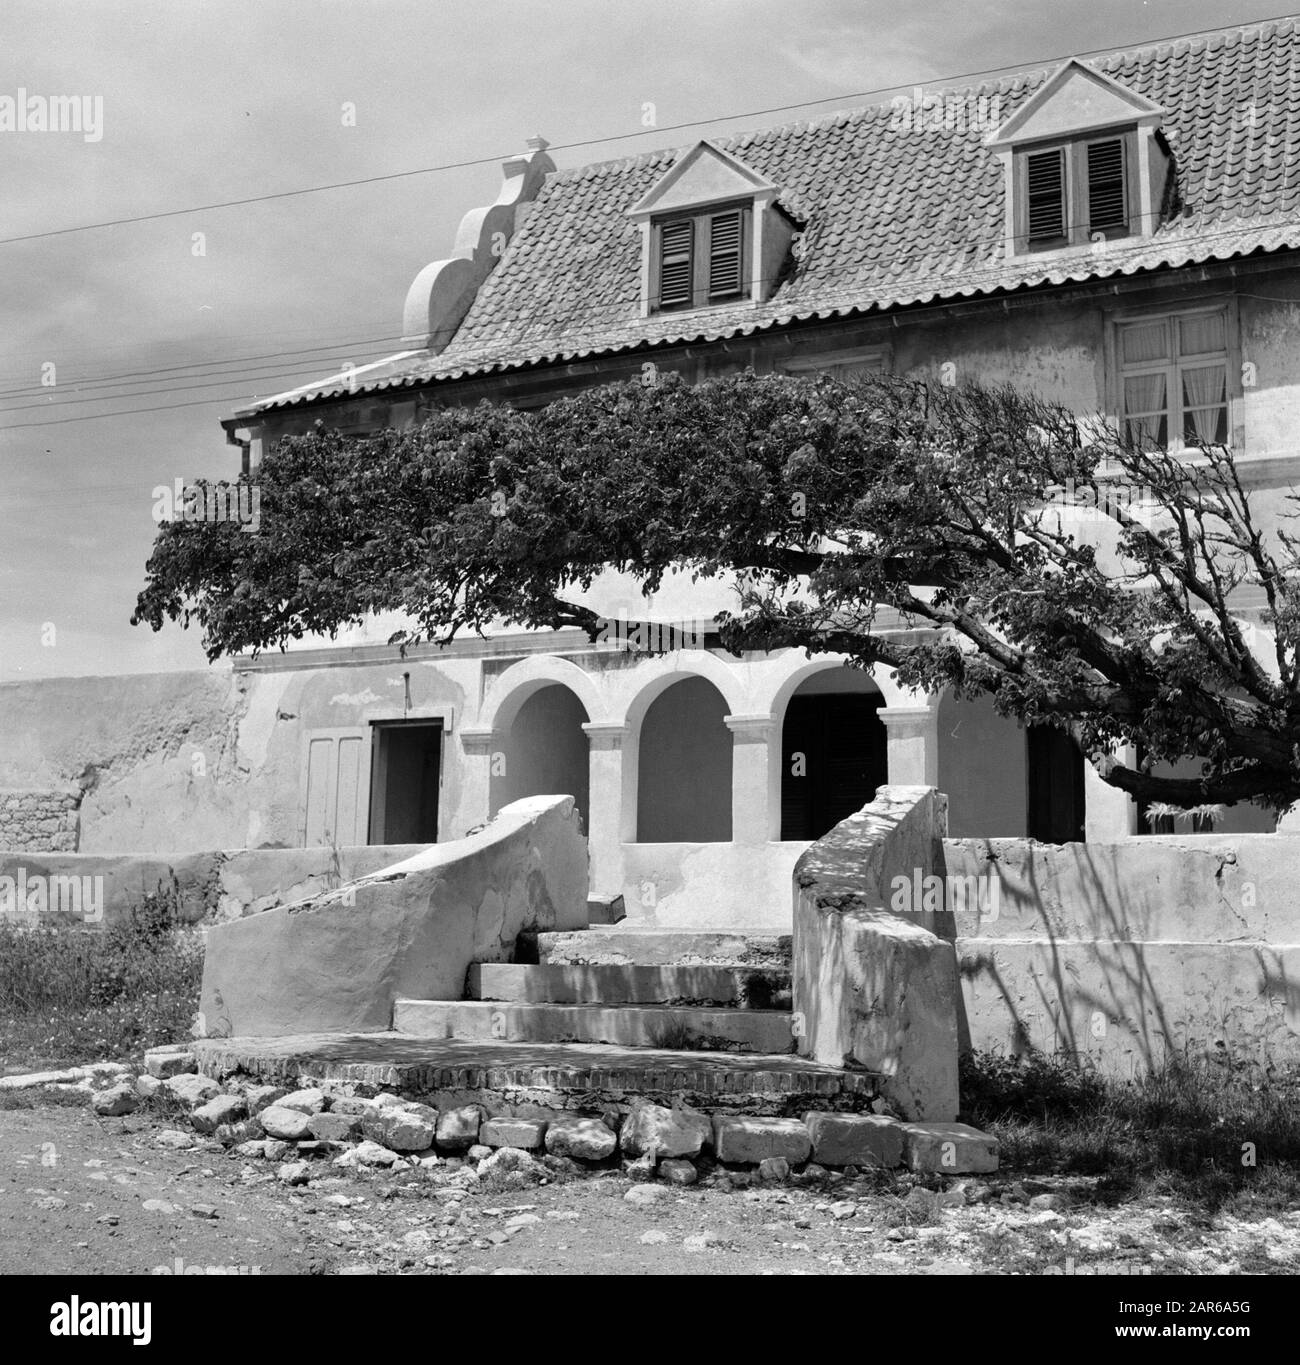 Netherlands Antilles and Suriname at the time of the royal visit of Queen Juliana and Prince Bernhard in 1955  Manor Habaai near Willemstad on Curaçao Date: 1 October 1955 Location: Curaçao, Dutch Antilles Keywords: buildings, country houses Stock Photo